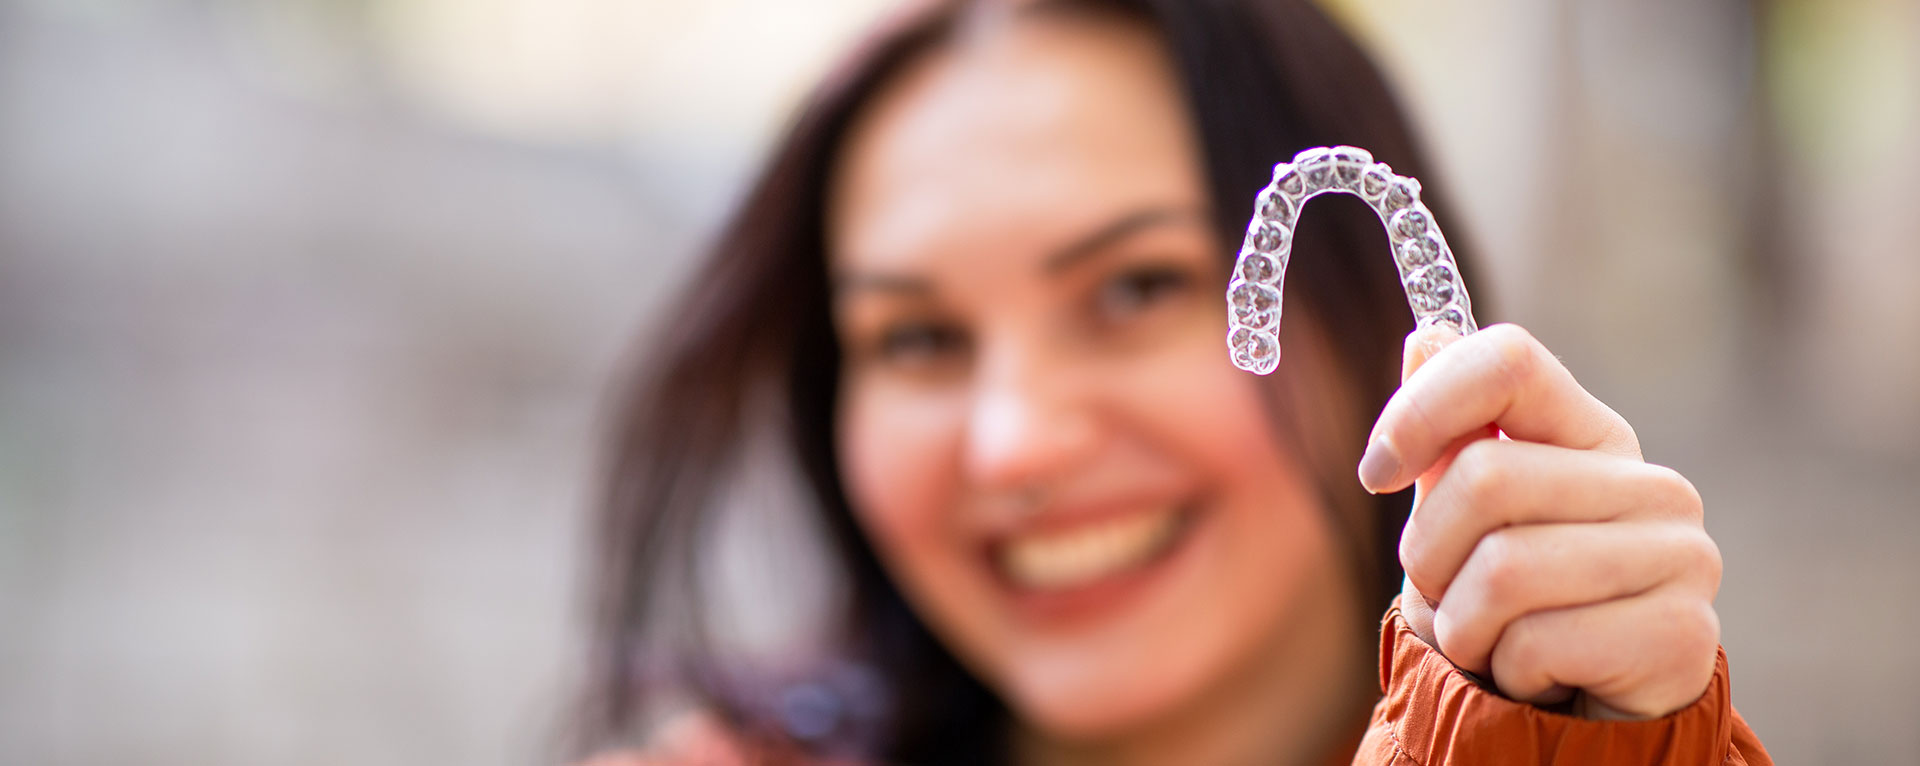 A smiling woman holding a toothbrush with a smiley face on it.